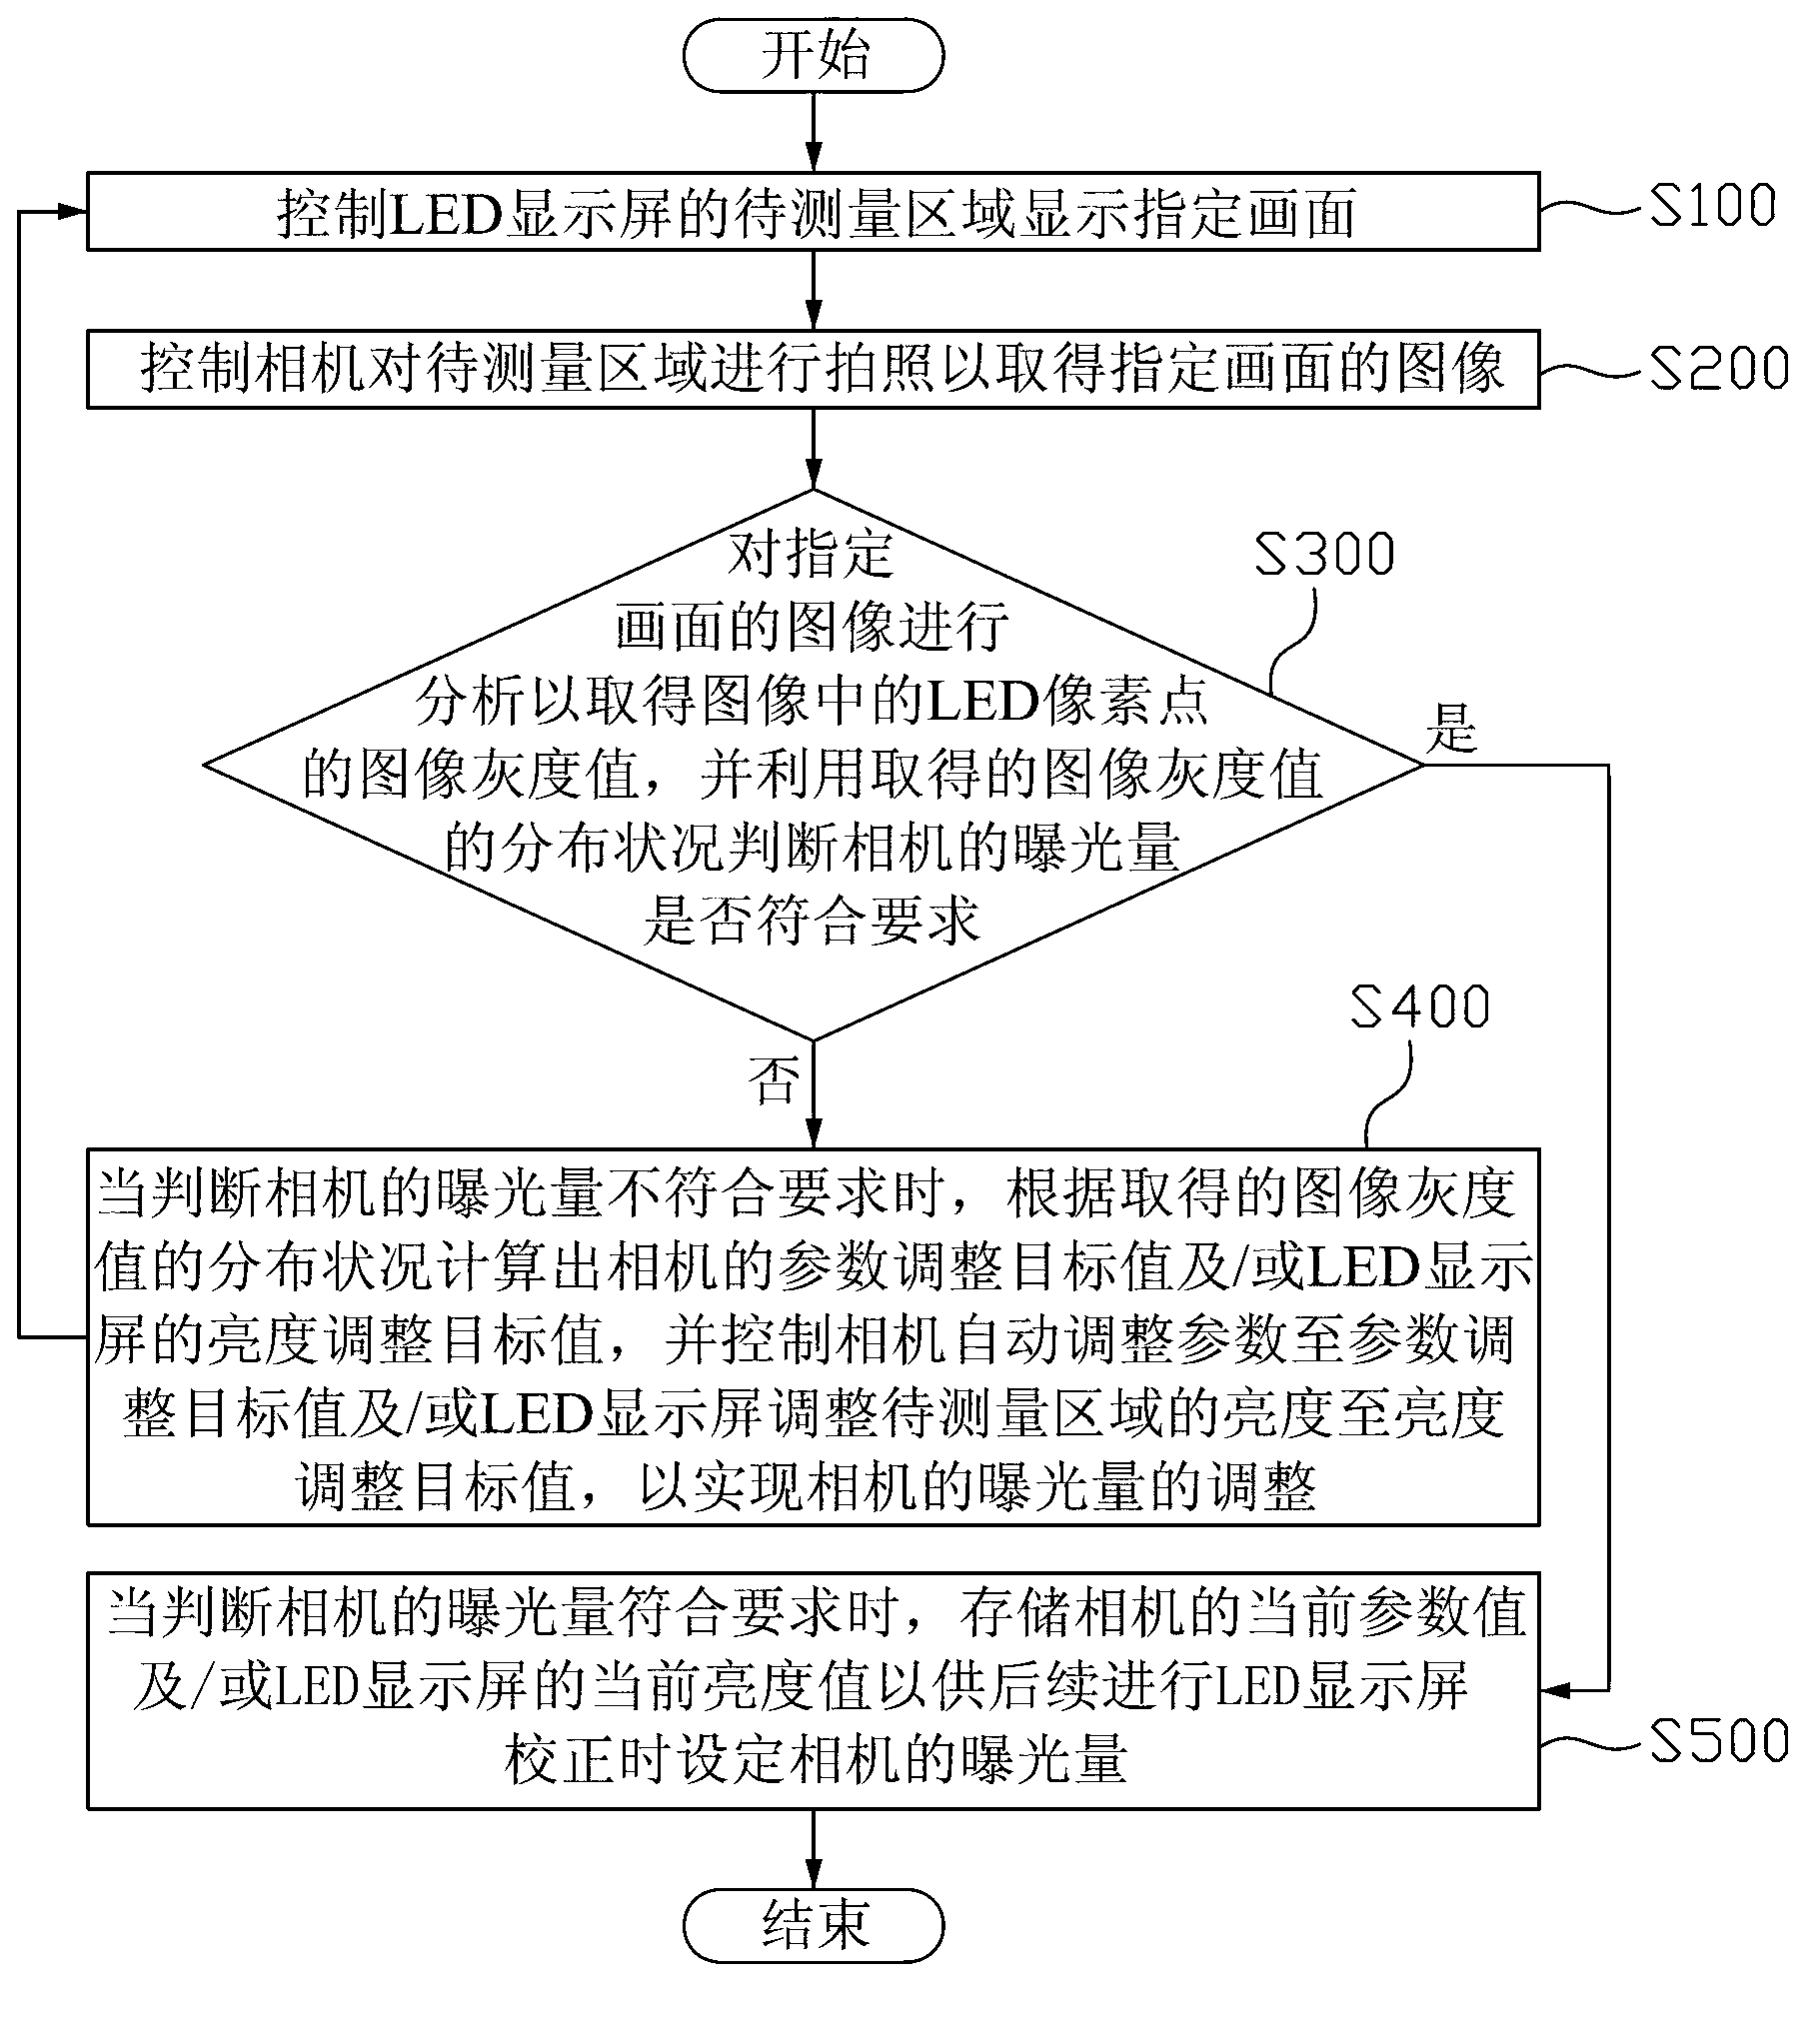 Parameter adjusting method and device of camera for correcting LED (Light Emitting Diode) display screen